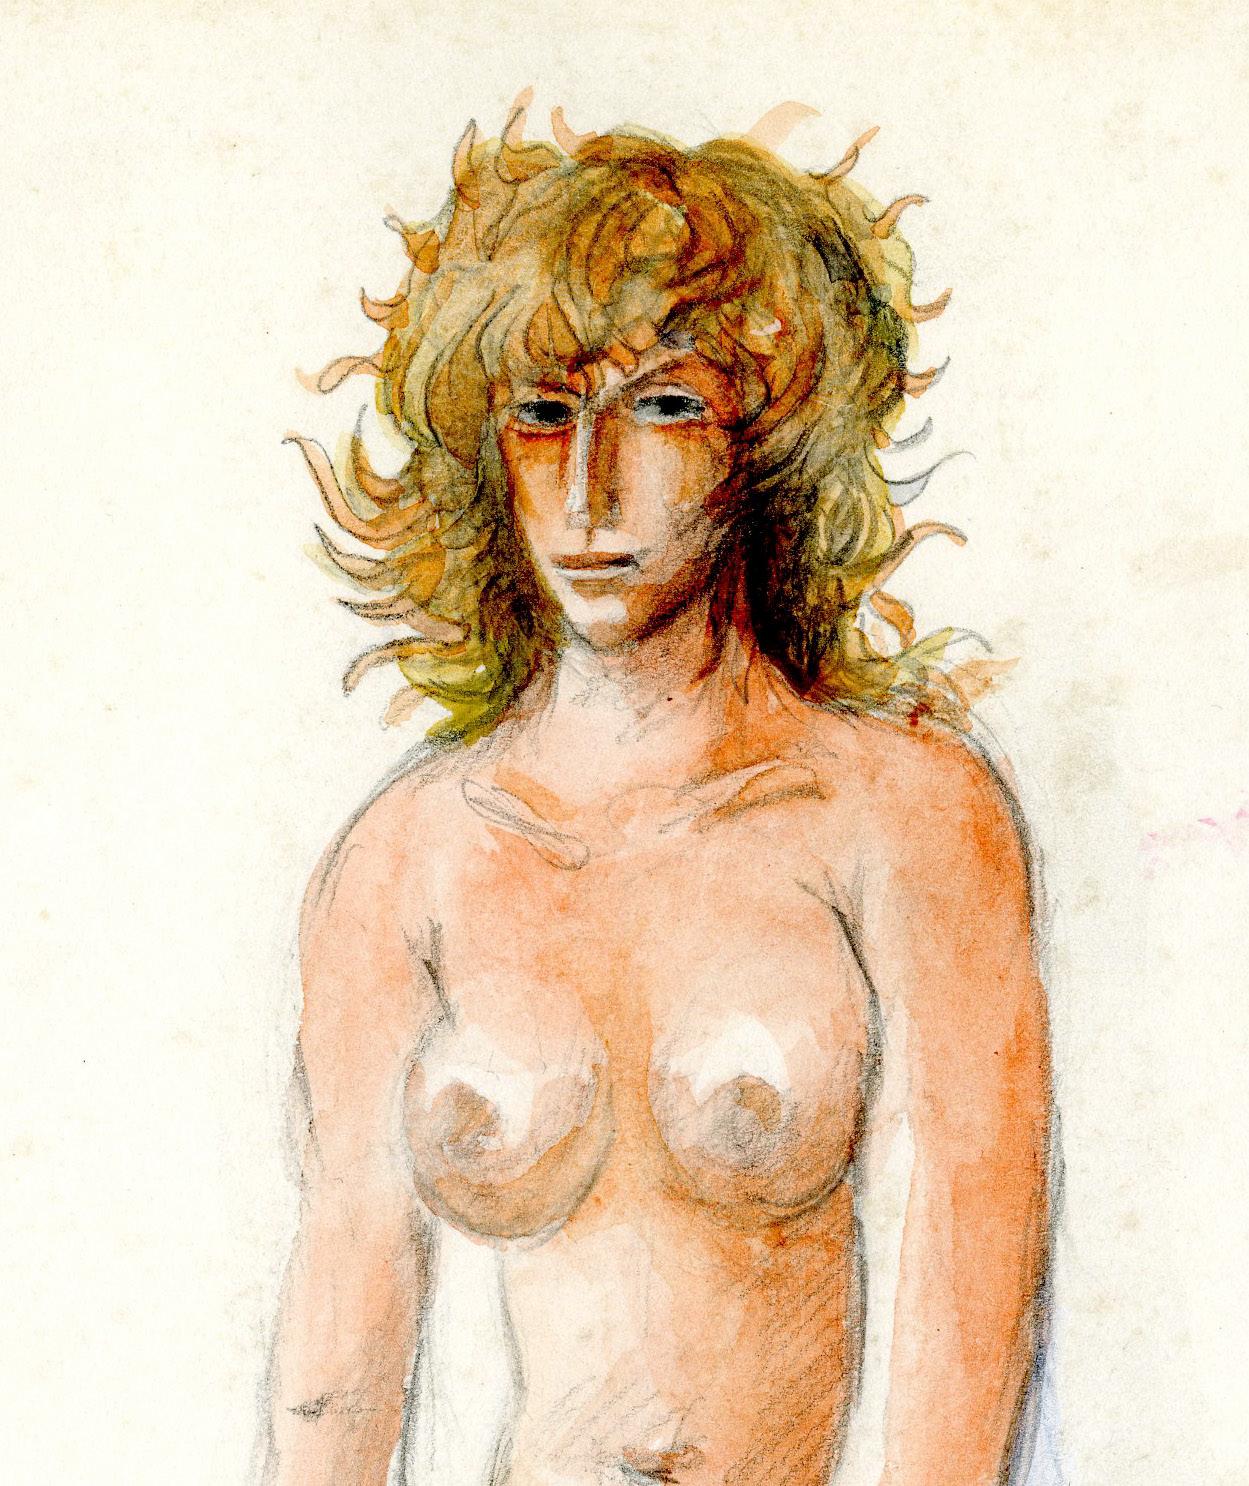 Seated Female Nude (Devora)
Watercolor on paper, c. 1970
Signed in pencil lower right (see photo)
A folio from the artist's sketchbook. Done while the artist was in Florida.
Condition: slight staining in the upper corners
Sheet size: 11 x 14